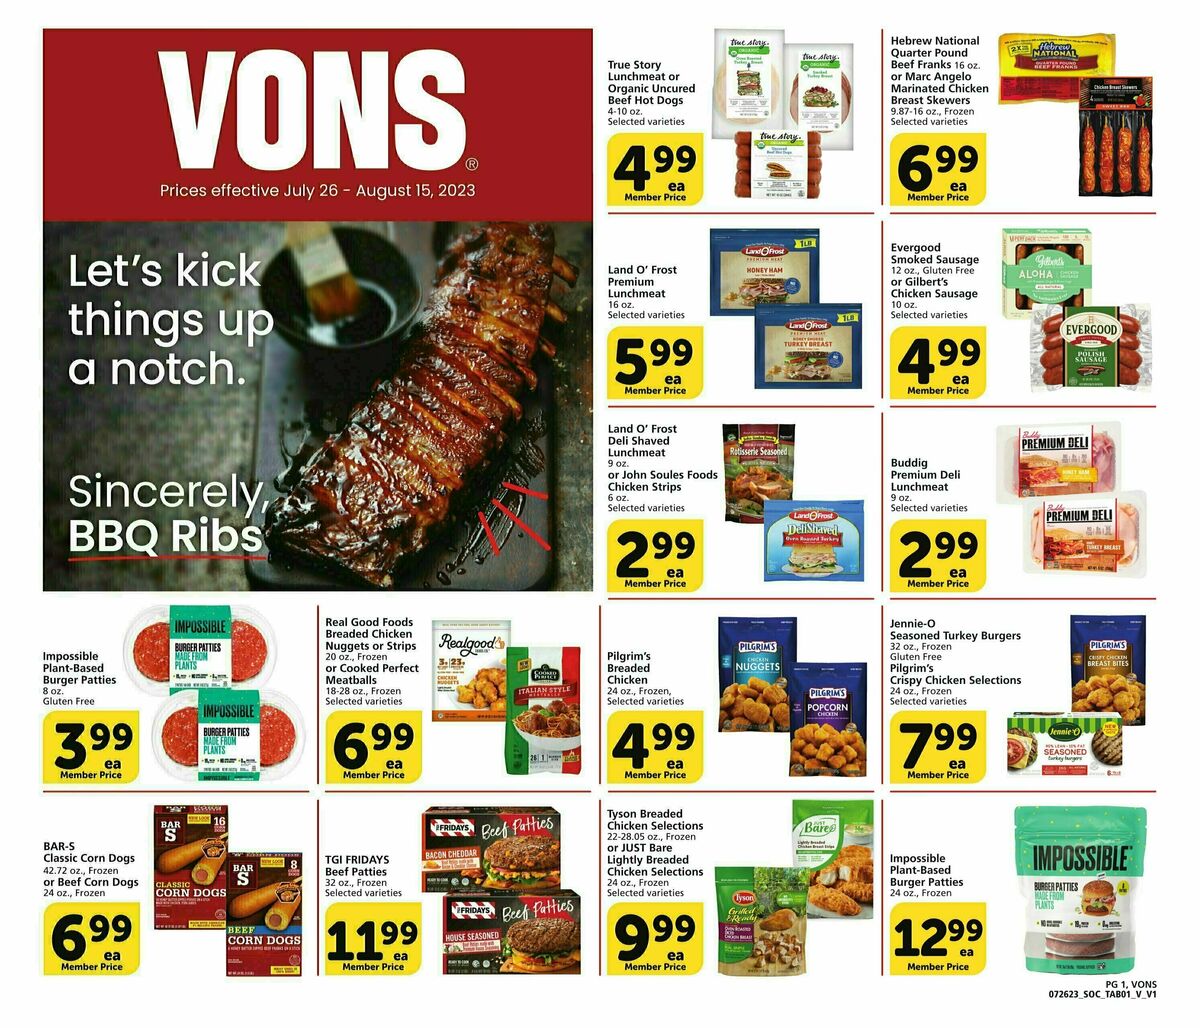 Vons Big Book of Savings Weekly Ad from July 26